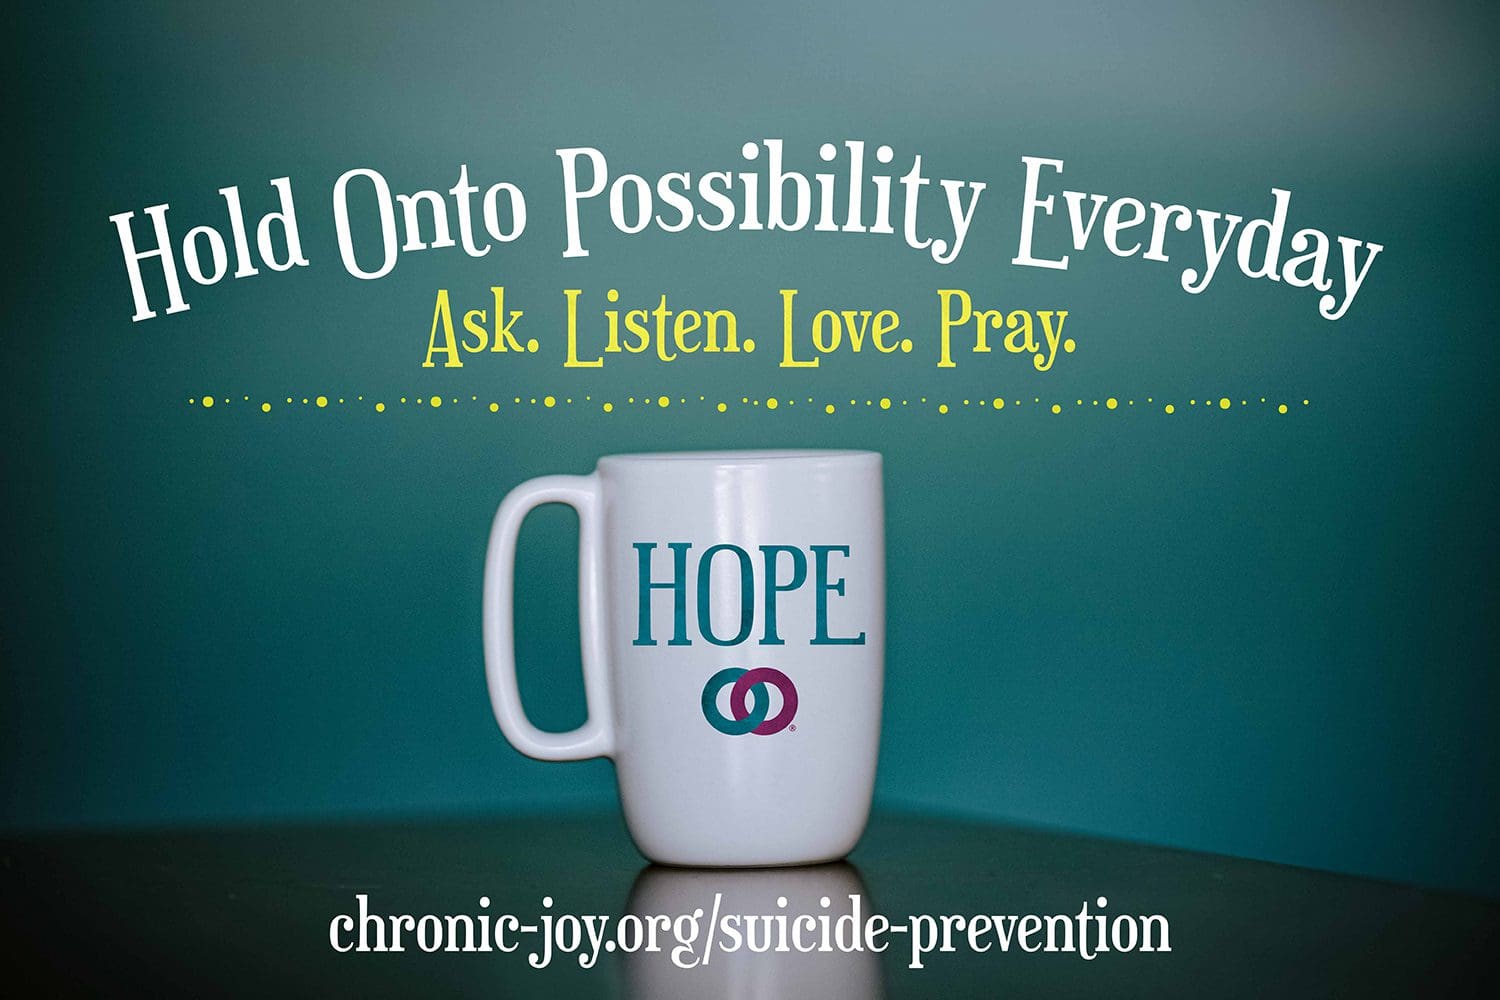 Hold Onto Possibility Everyday - Ask. Listen. Love. Prevent Suicide One Precious Life at a Time.